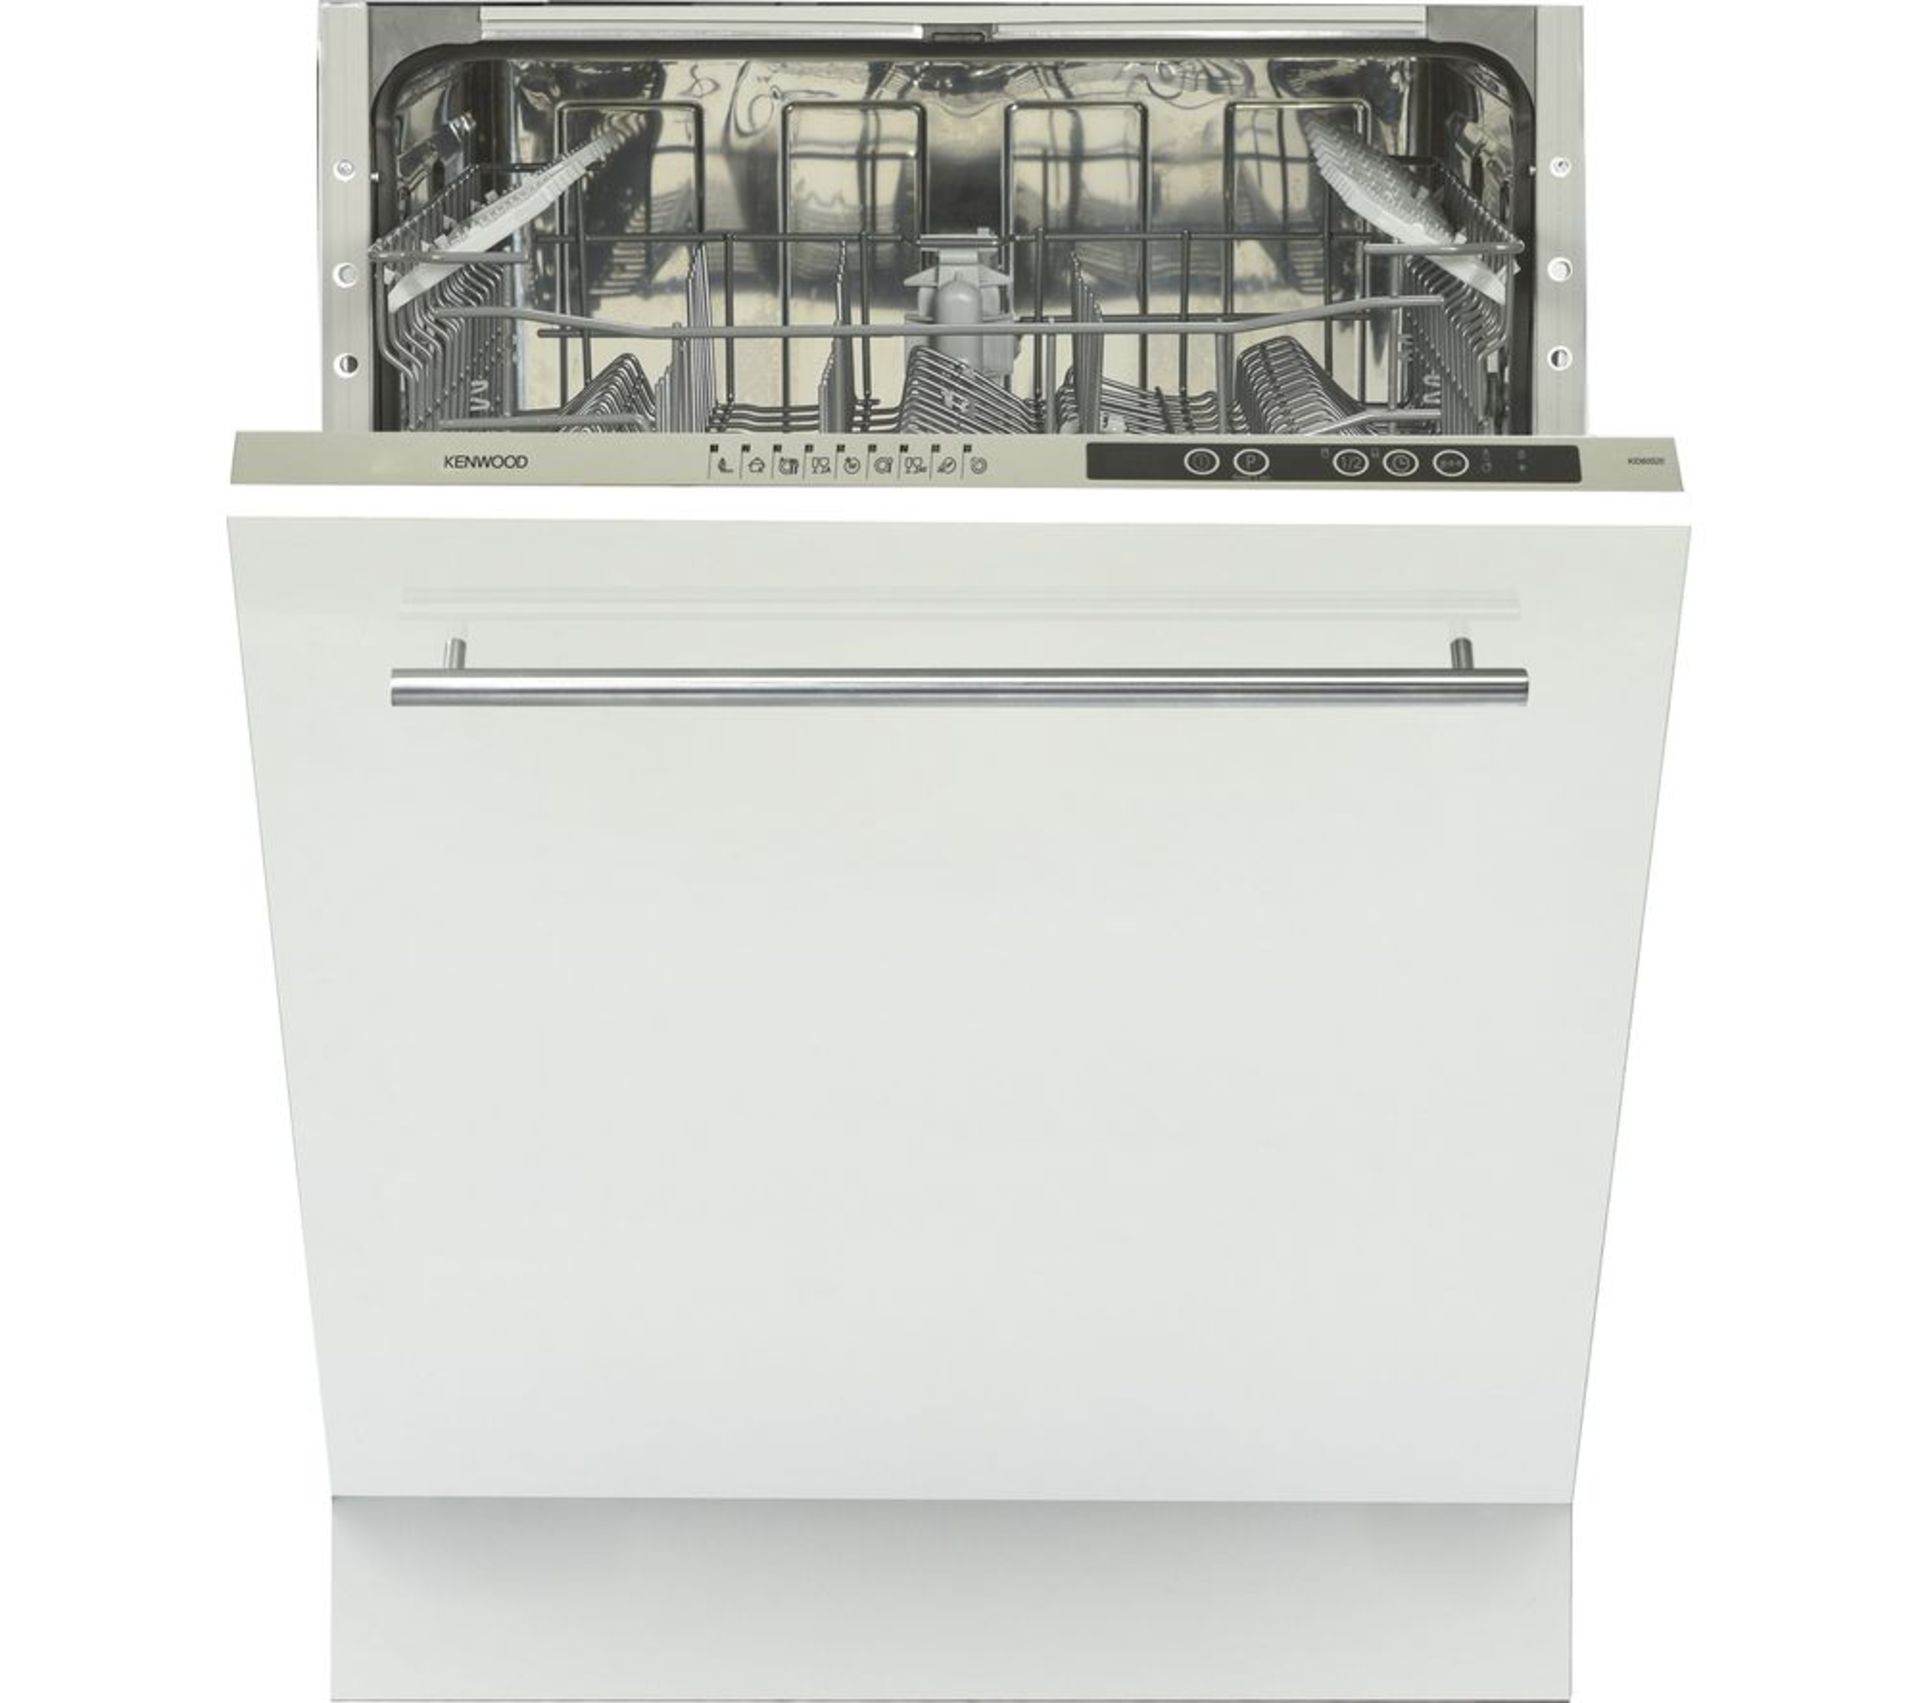 Pallets of Mixed White Goods. Brands include KENWOOD, LOGIC. Latest selling price £657.00 - Image 3 of 4